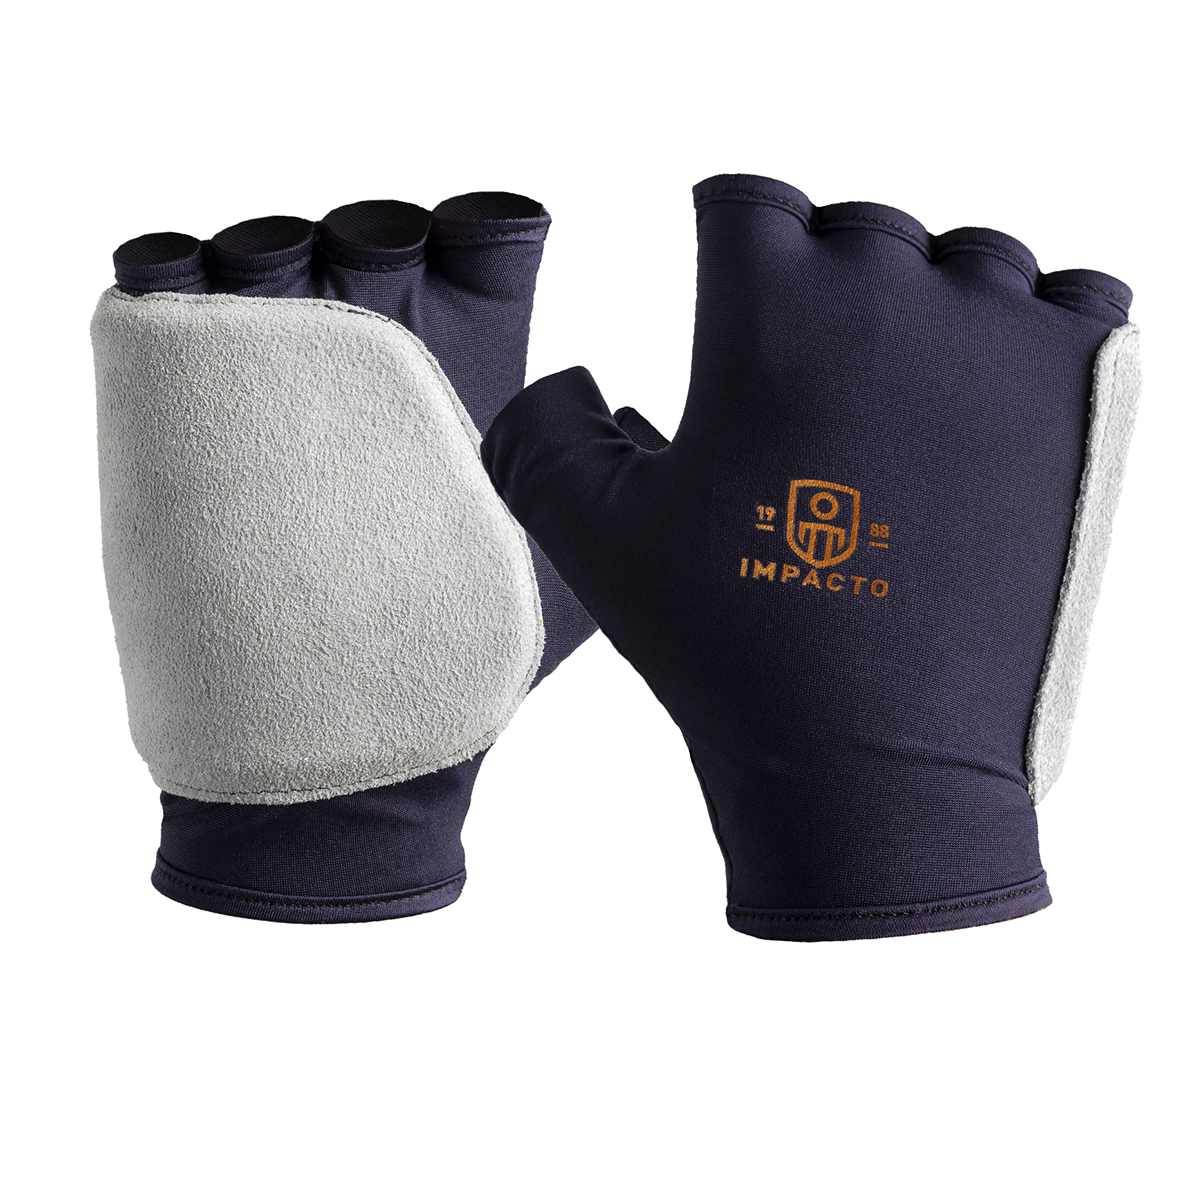 IMPACTO 523-14MPR GLOVE IMPACT 1/4 SUEDE SIDE